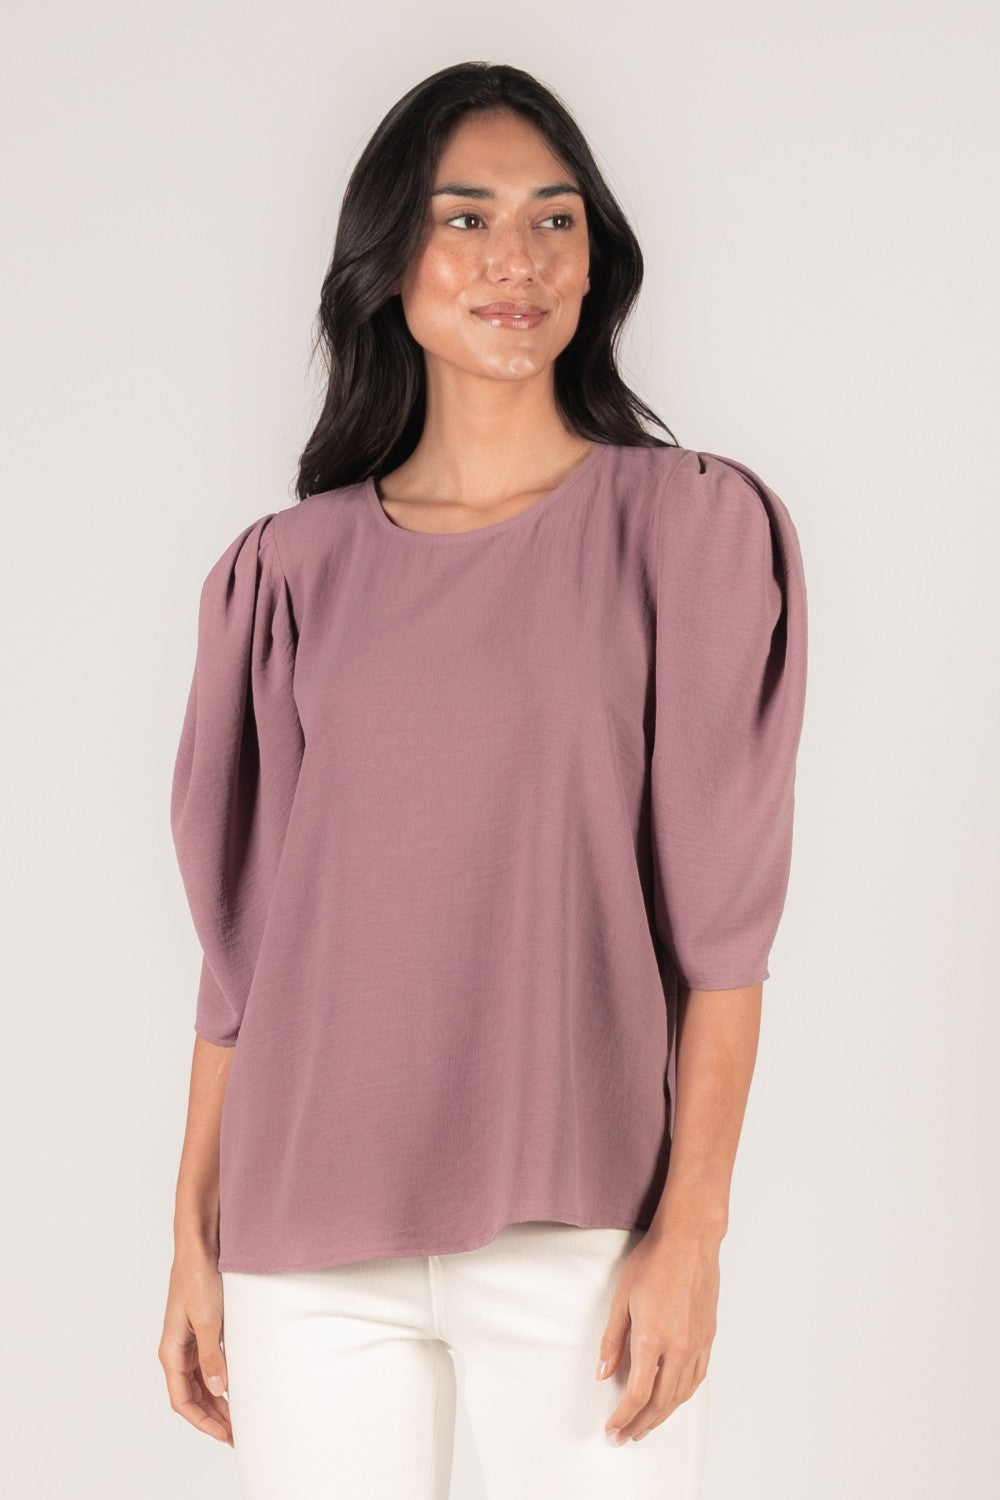 Before You Round Neck Pintuck Sleeve Top